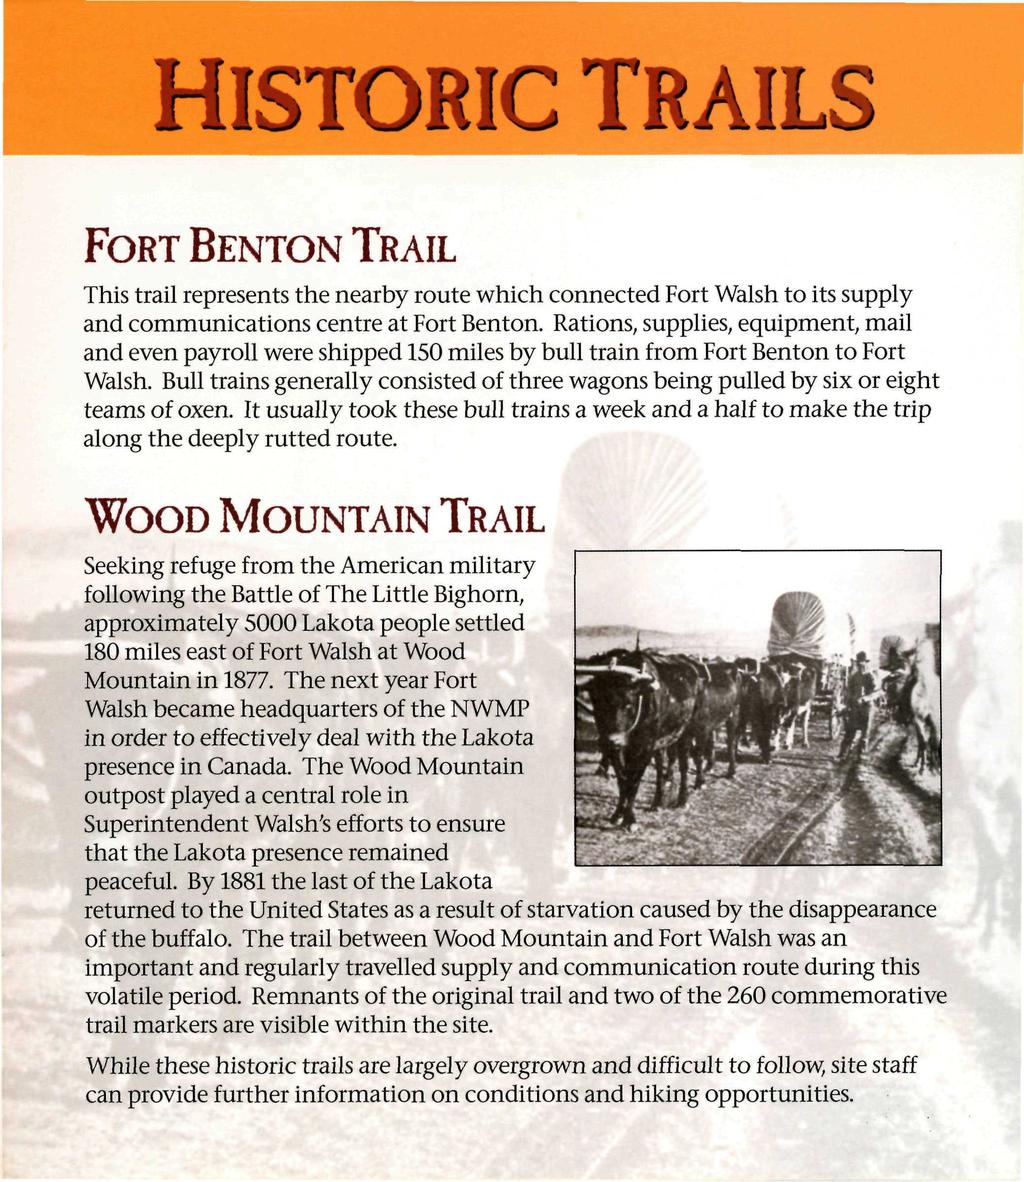 HISTORIC TRAILS FORT BENTON TRAIL This trail represents the nearby route which connected Fort Walsh to its supply and communications centre at Fort Benton.